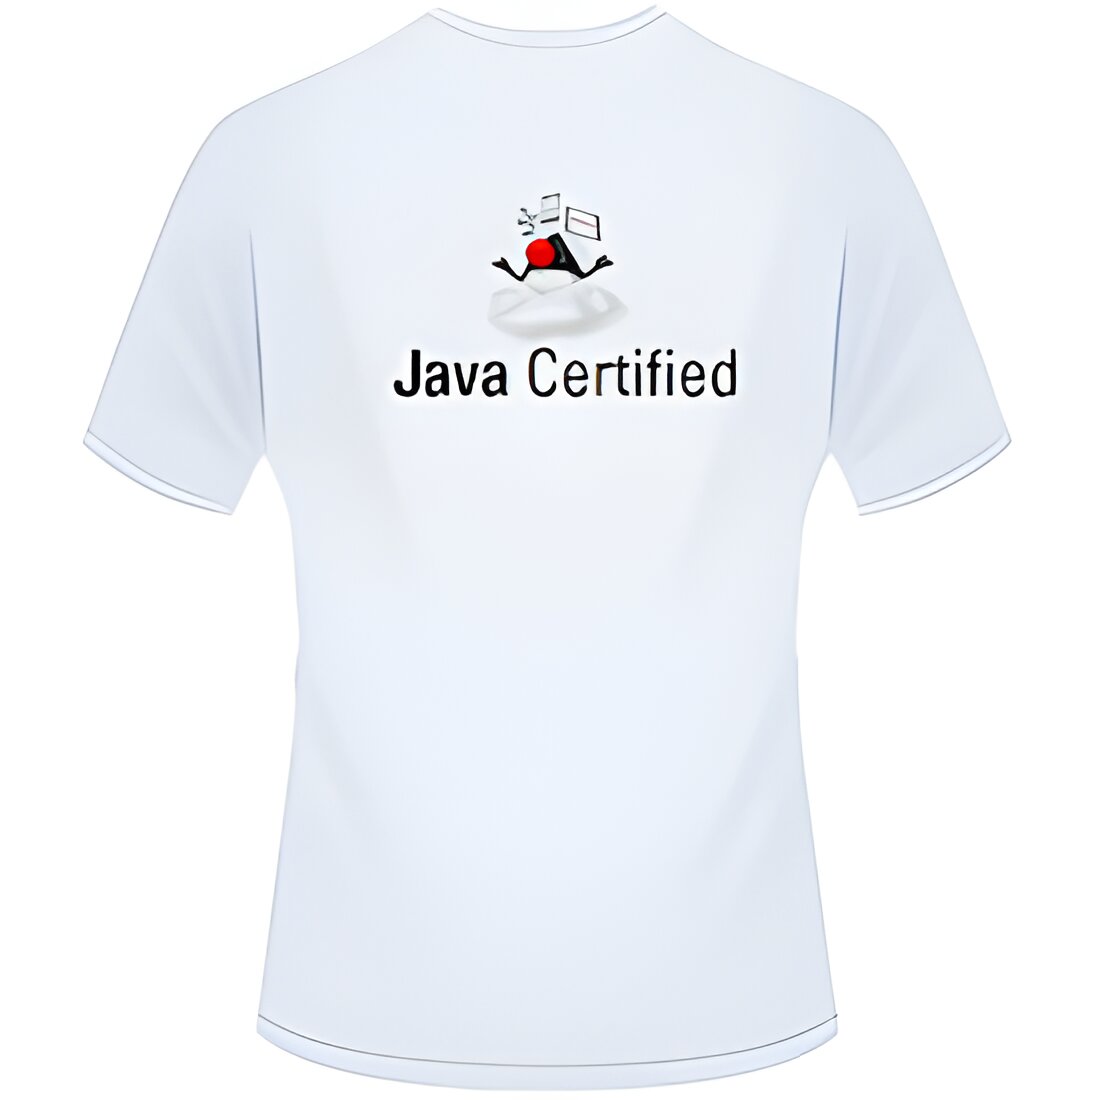 Free Java Certified T-Shirt by Oracle